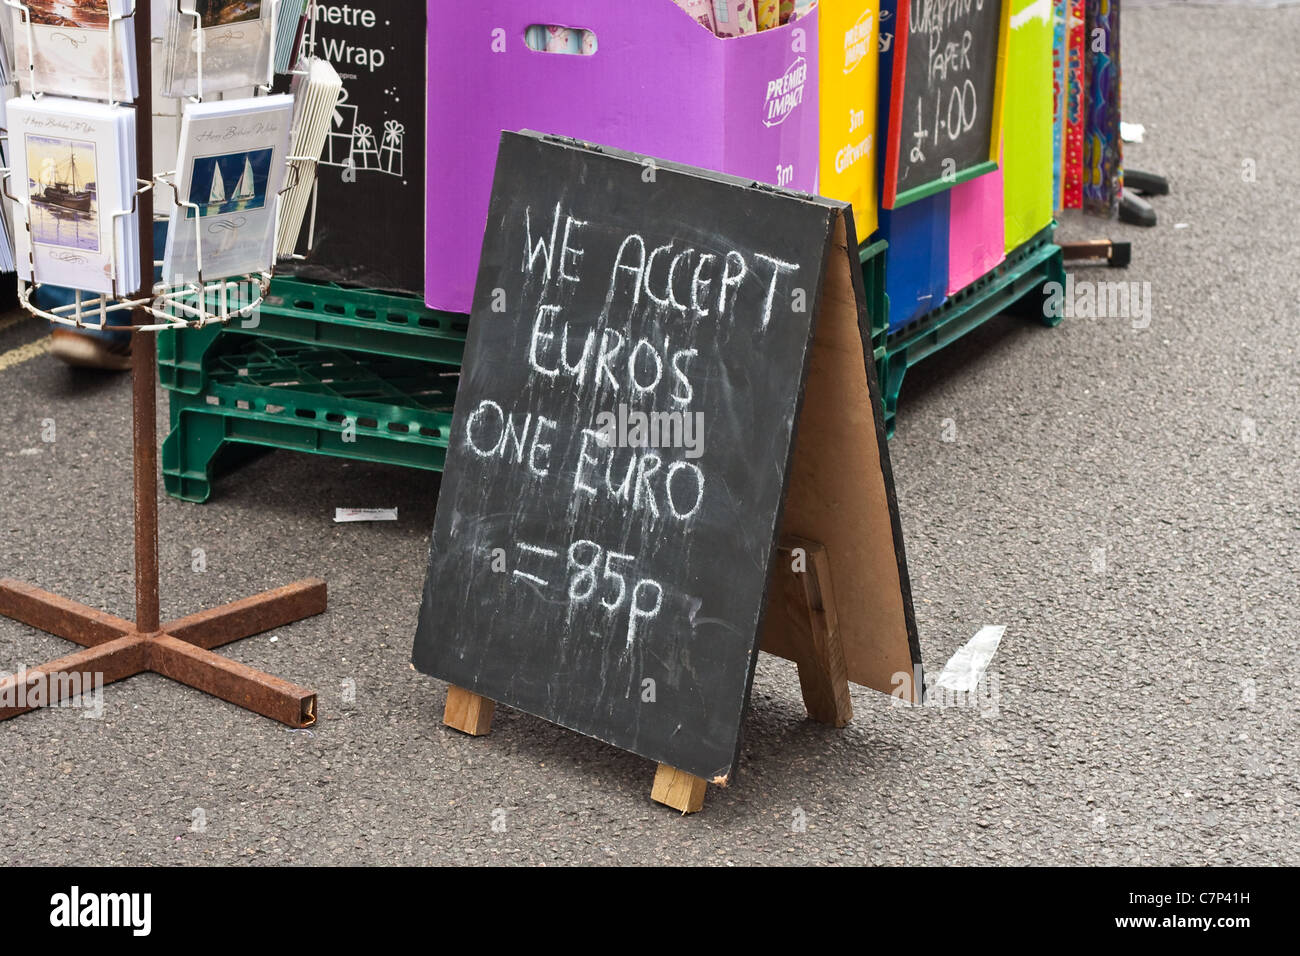 Black board in a UK market stating that euros are accepted, with current rate as 1 Euro = 85p.  September 2011. Stock Photo